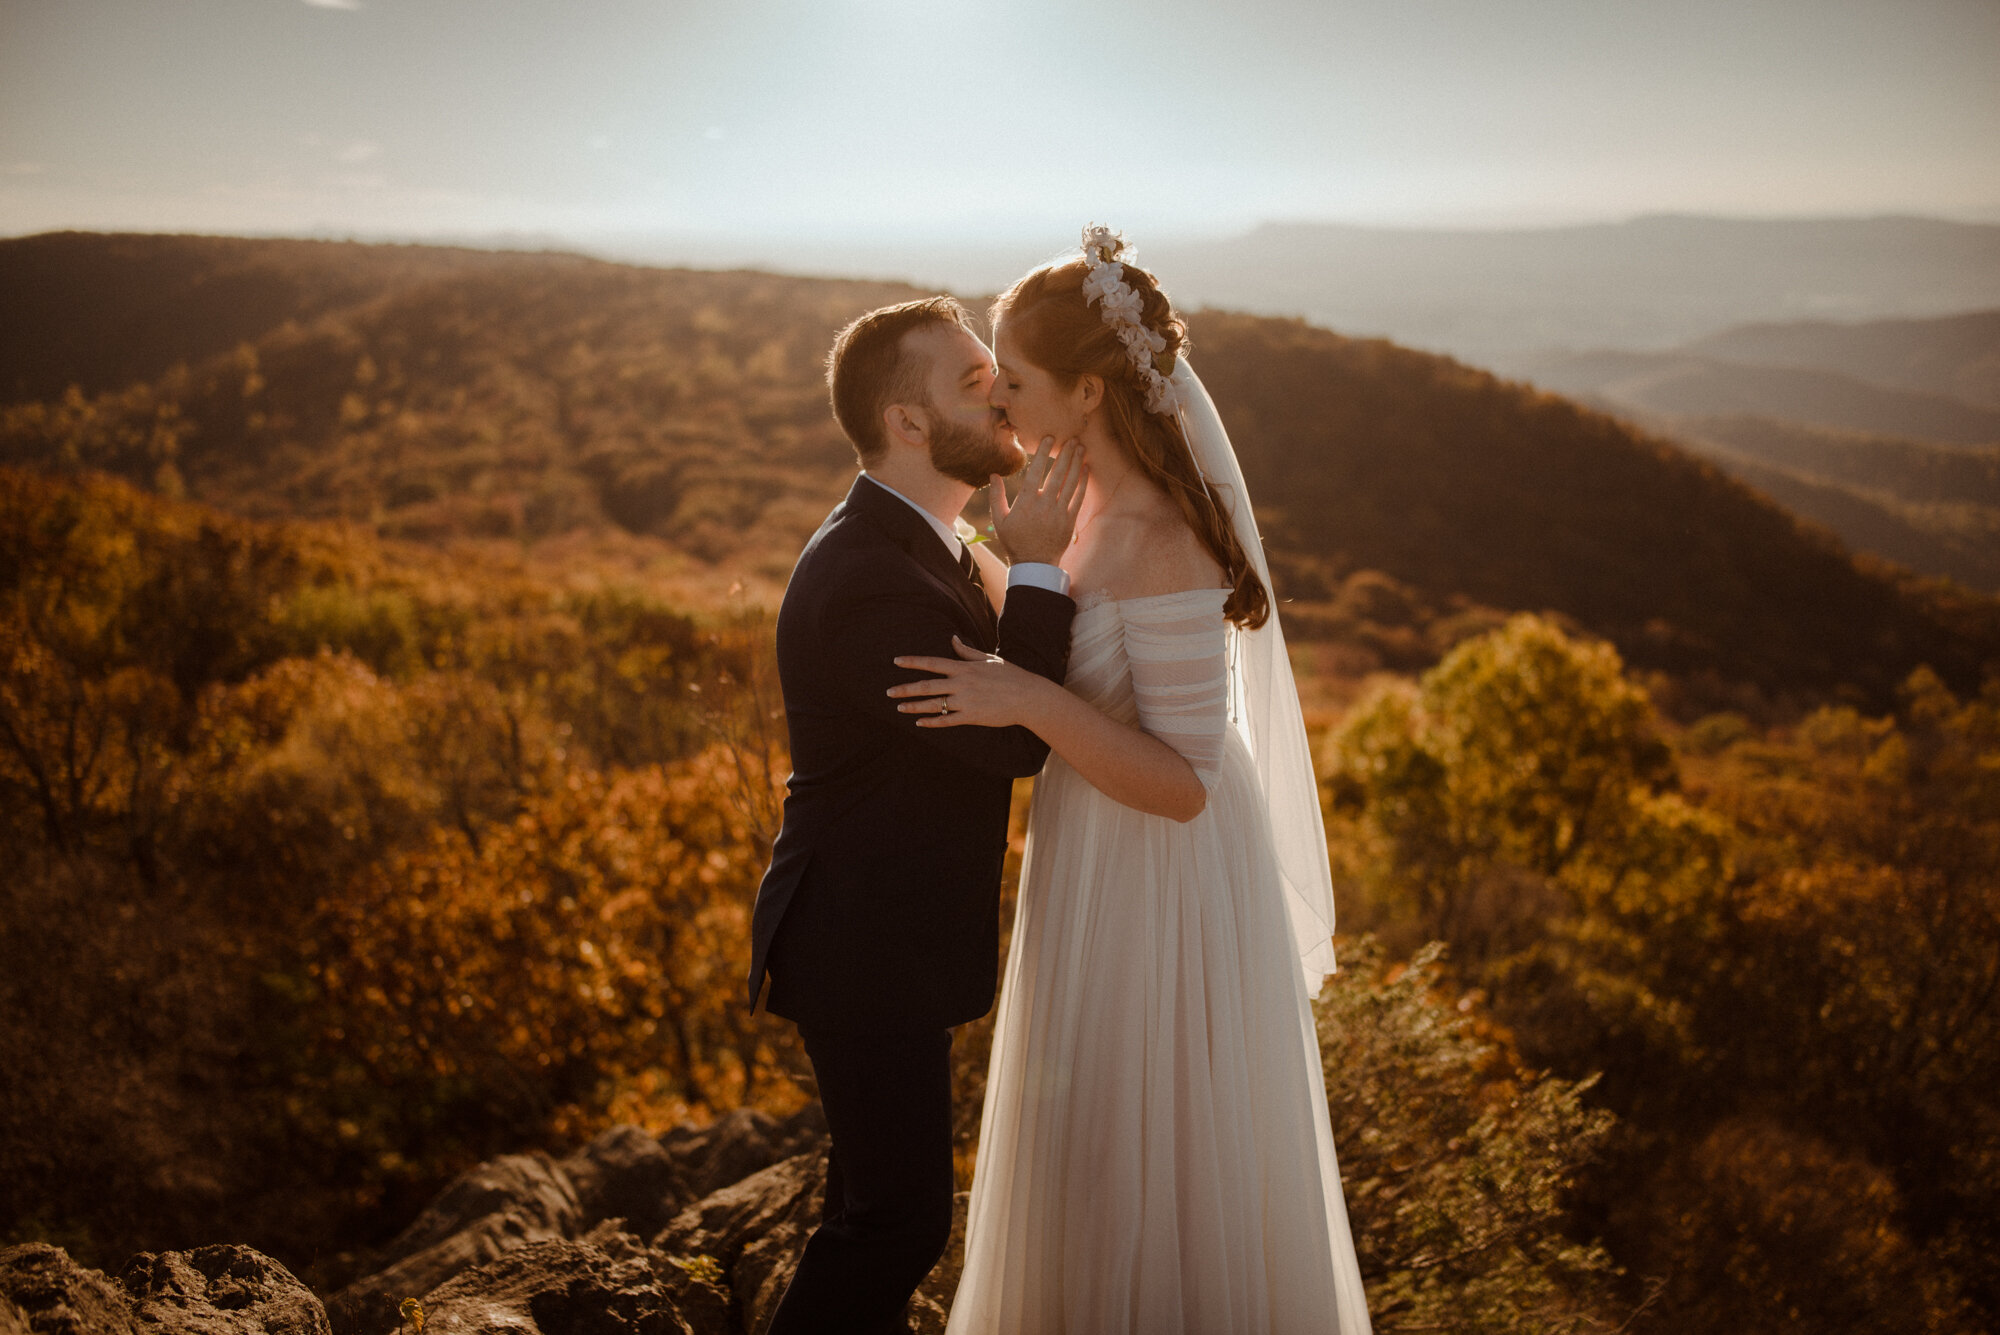 Emily and Ryan - Mountain Top Elopement - Shenandoah National Park - Blue Ridge Mountains Couple Photo Shoot in the Fall - White Sails Creative_31.jpg